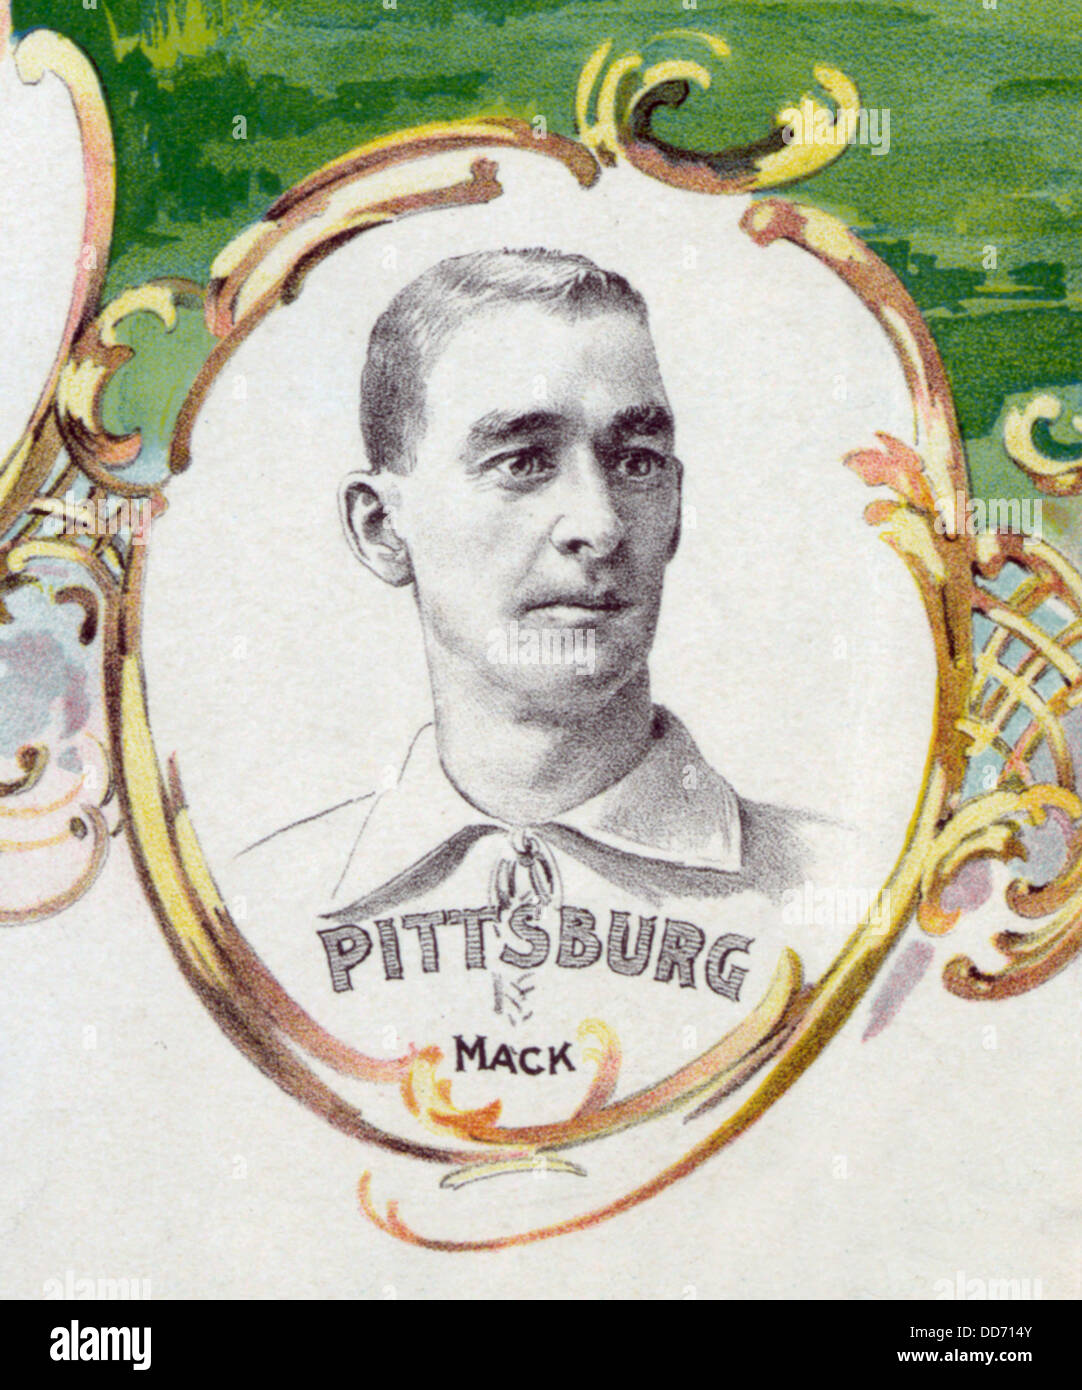 Connie Mack, Pittsburgh Pirates manager. 1895 Stock Photo